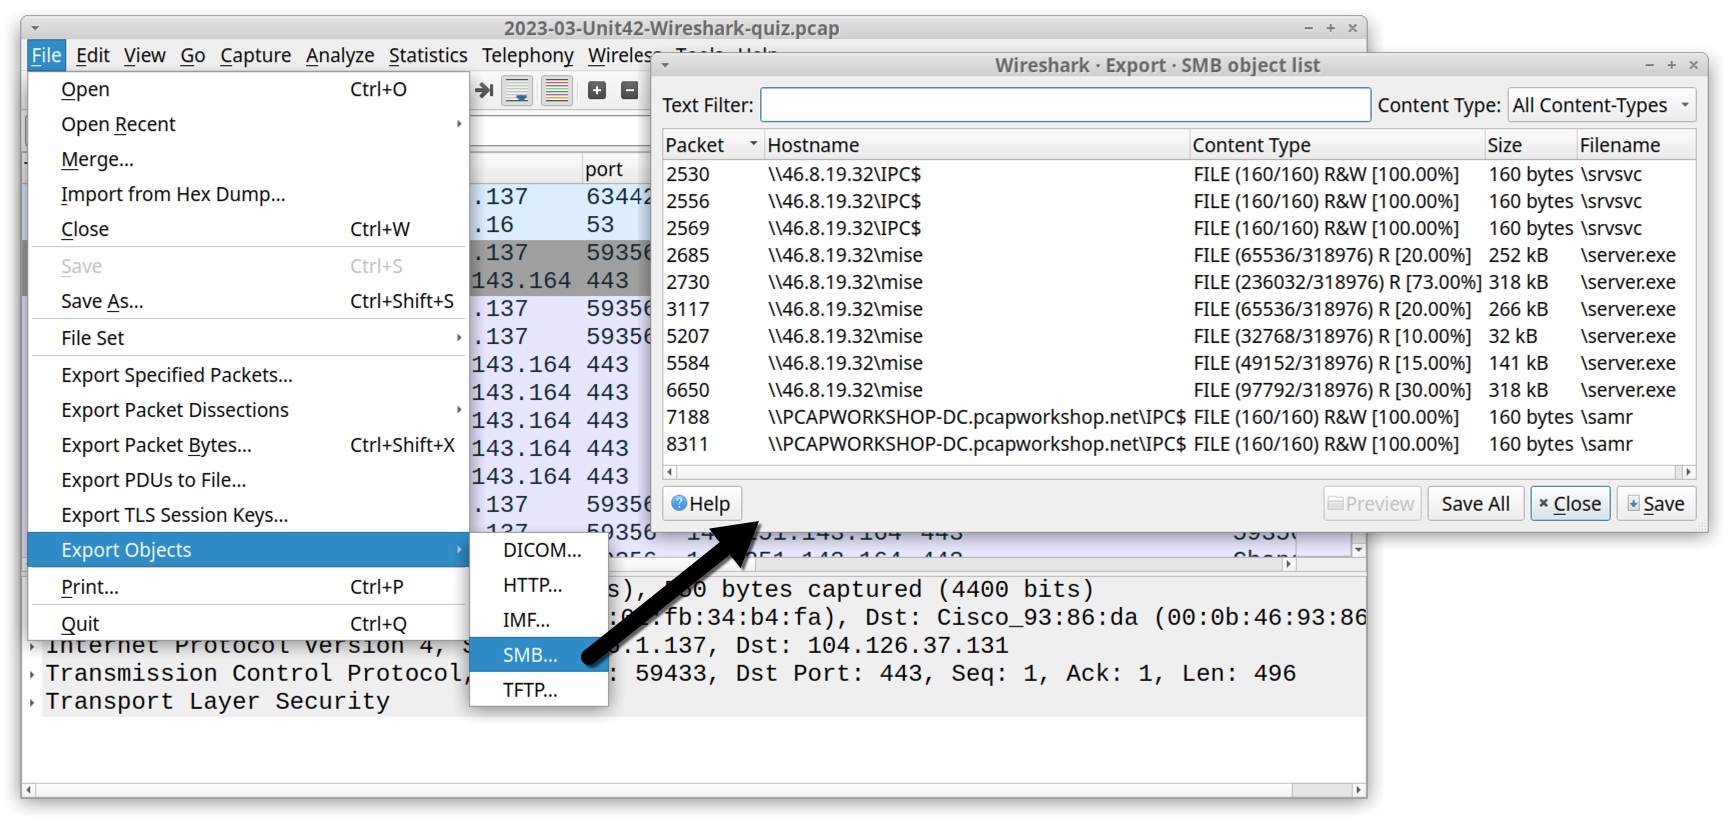 Image 10 is a screenshot of Wireshark showing how to use the SMB option from Export Objects in the File menu.